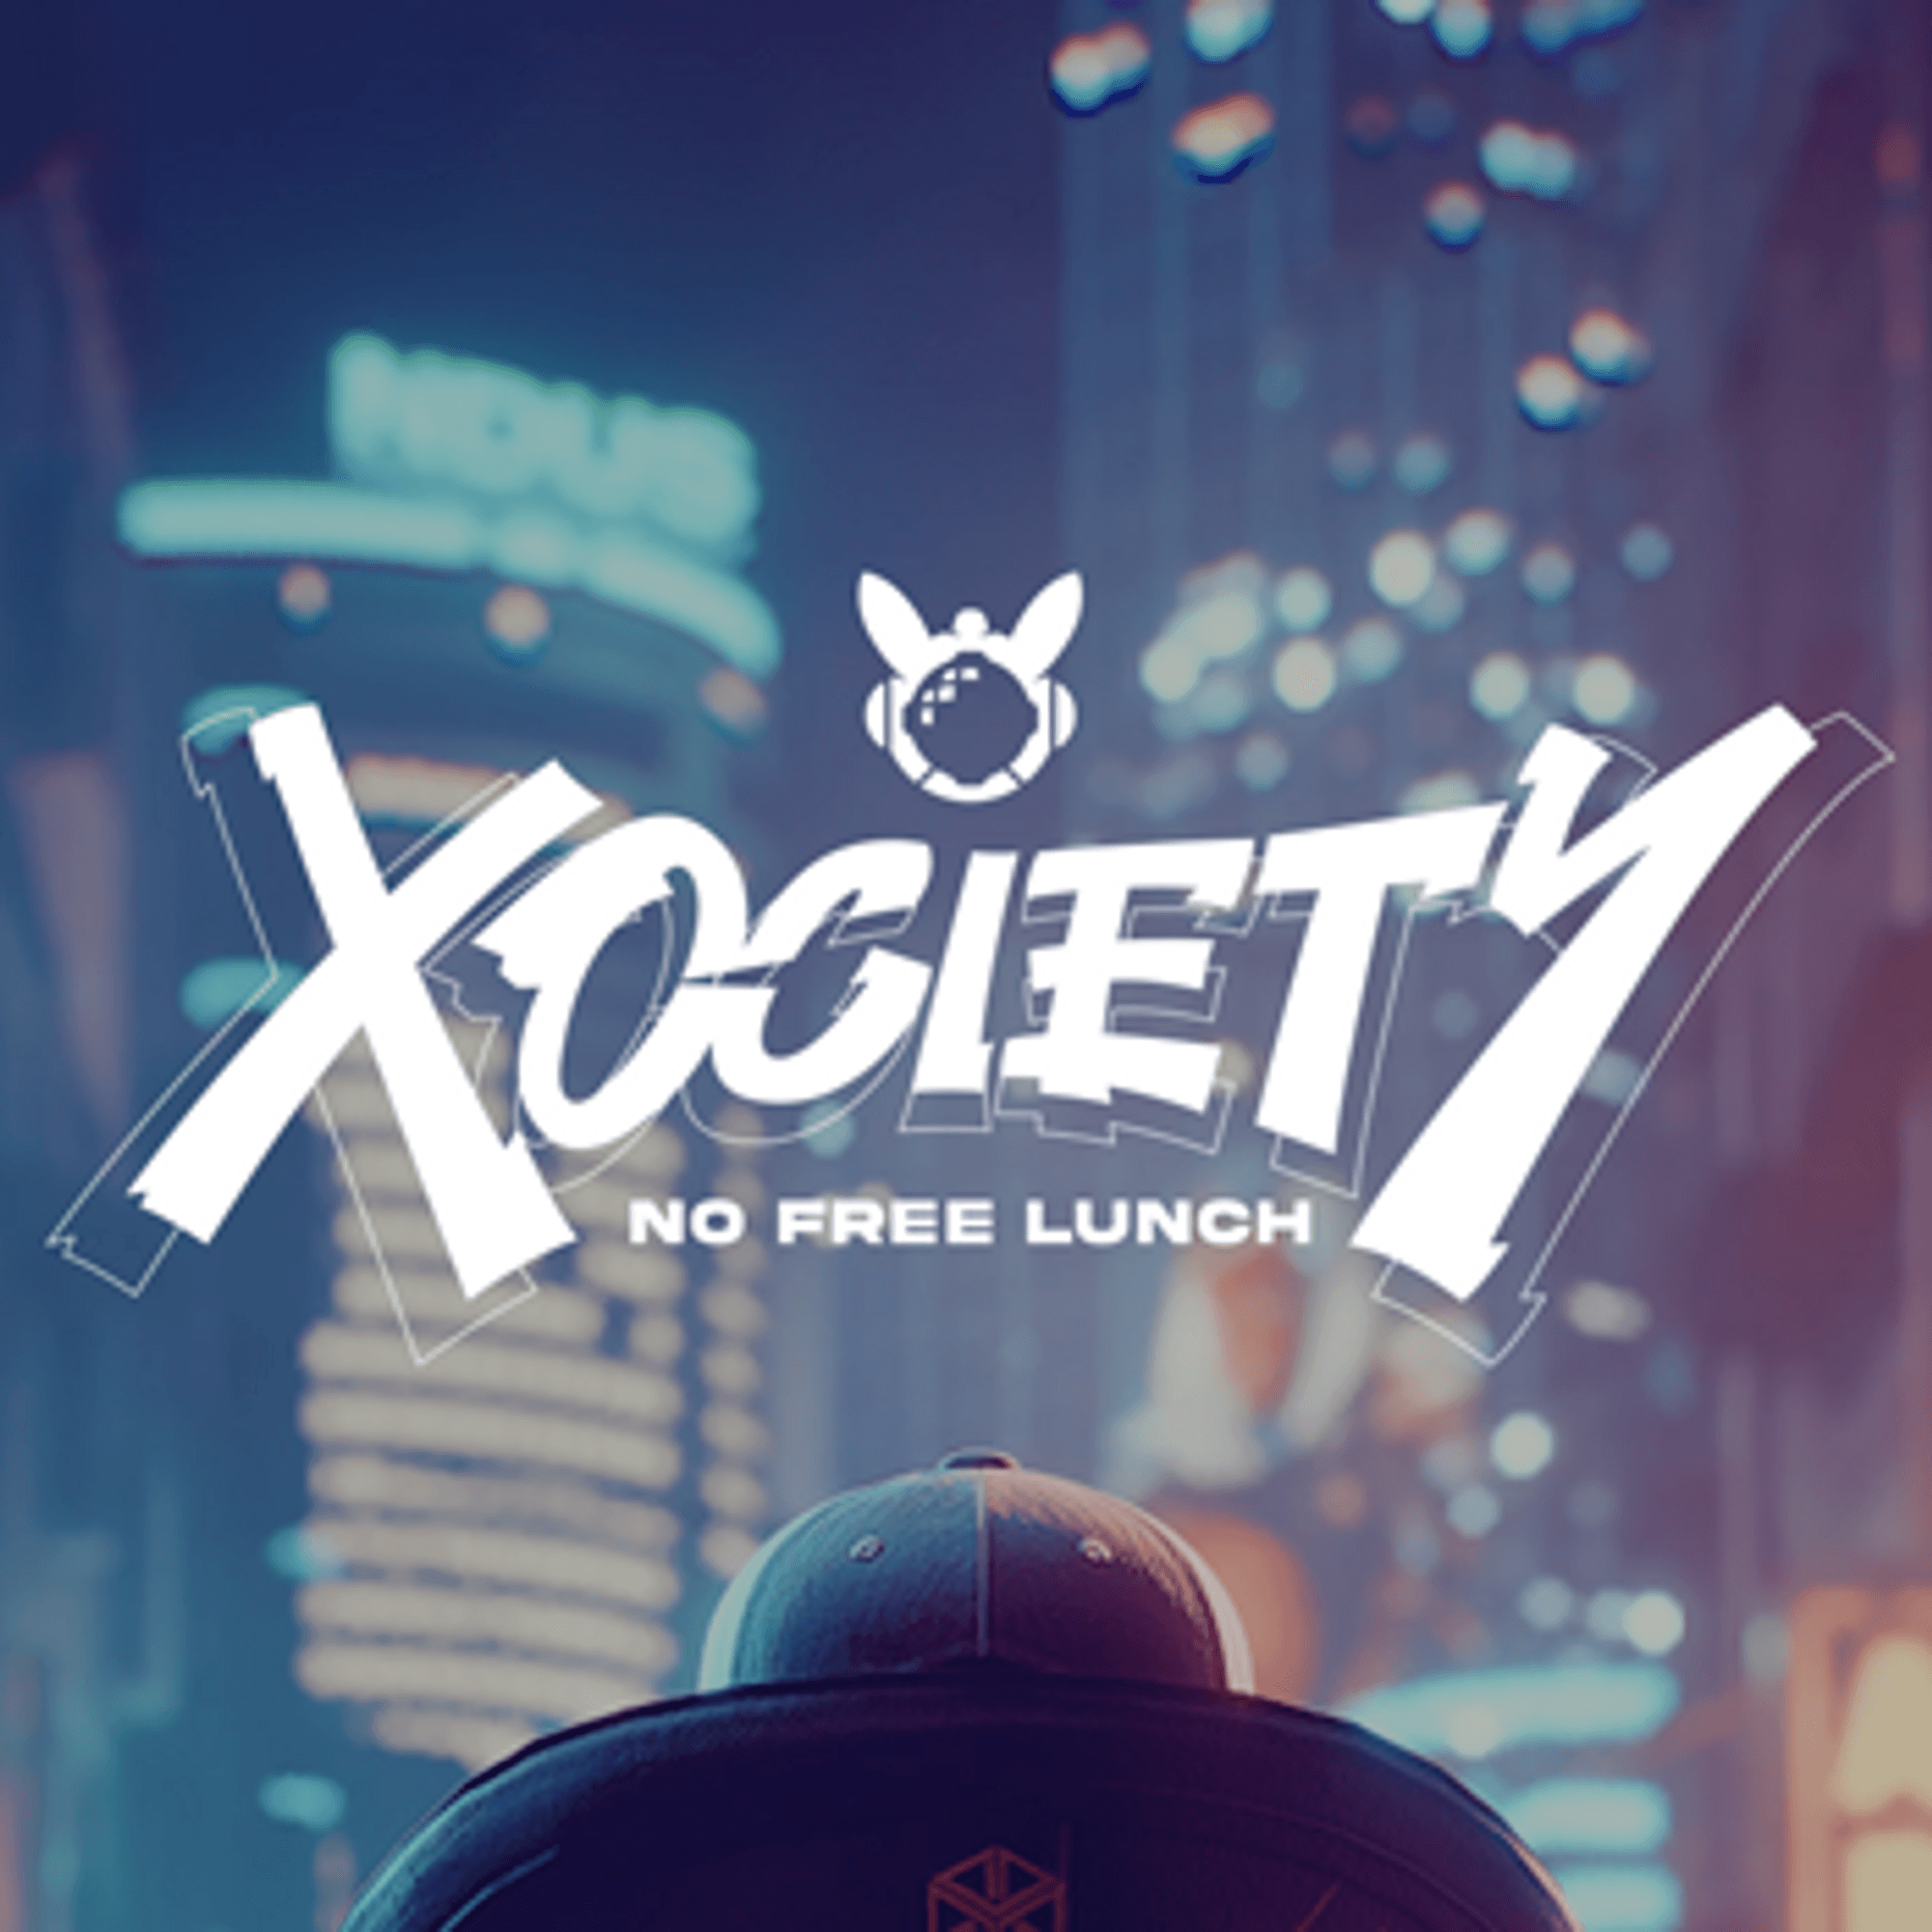 XOCIETYofficial